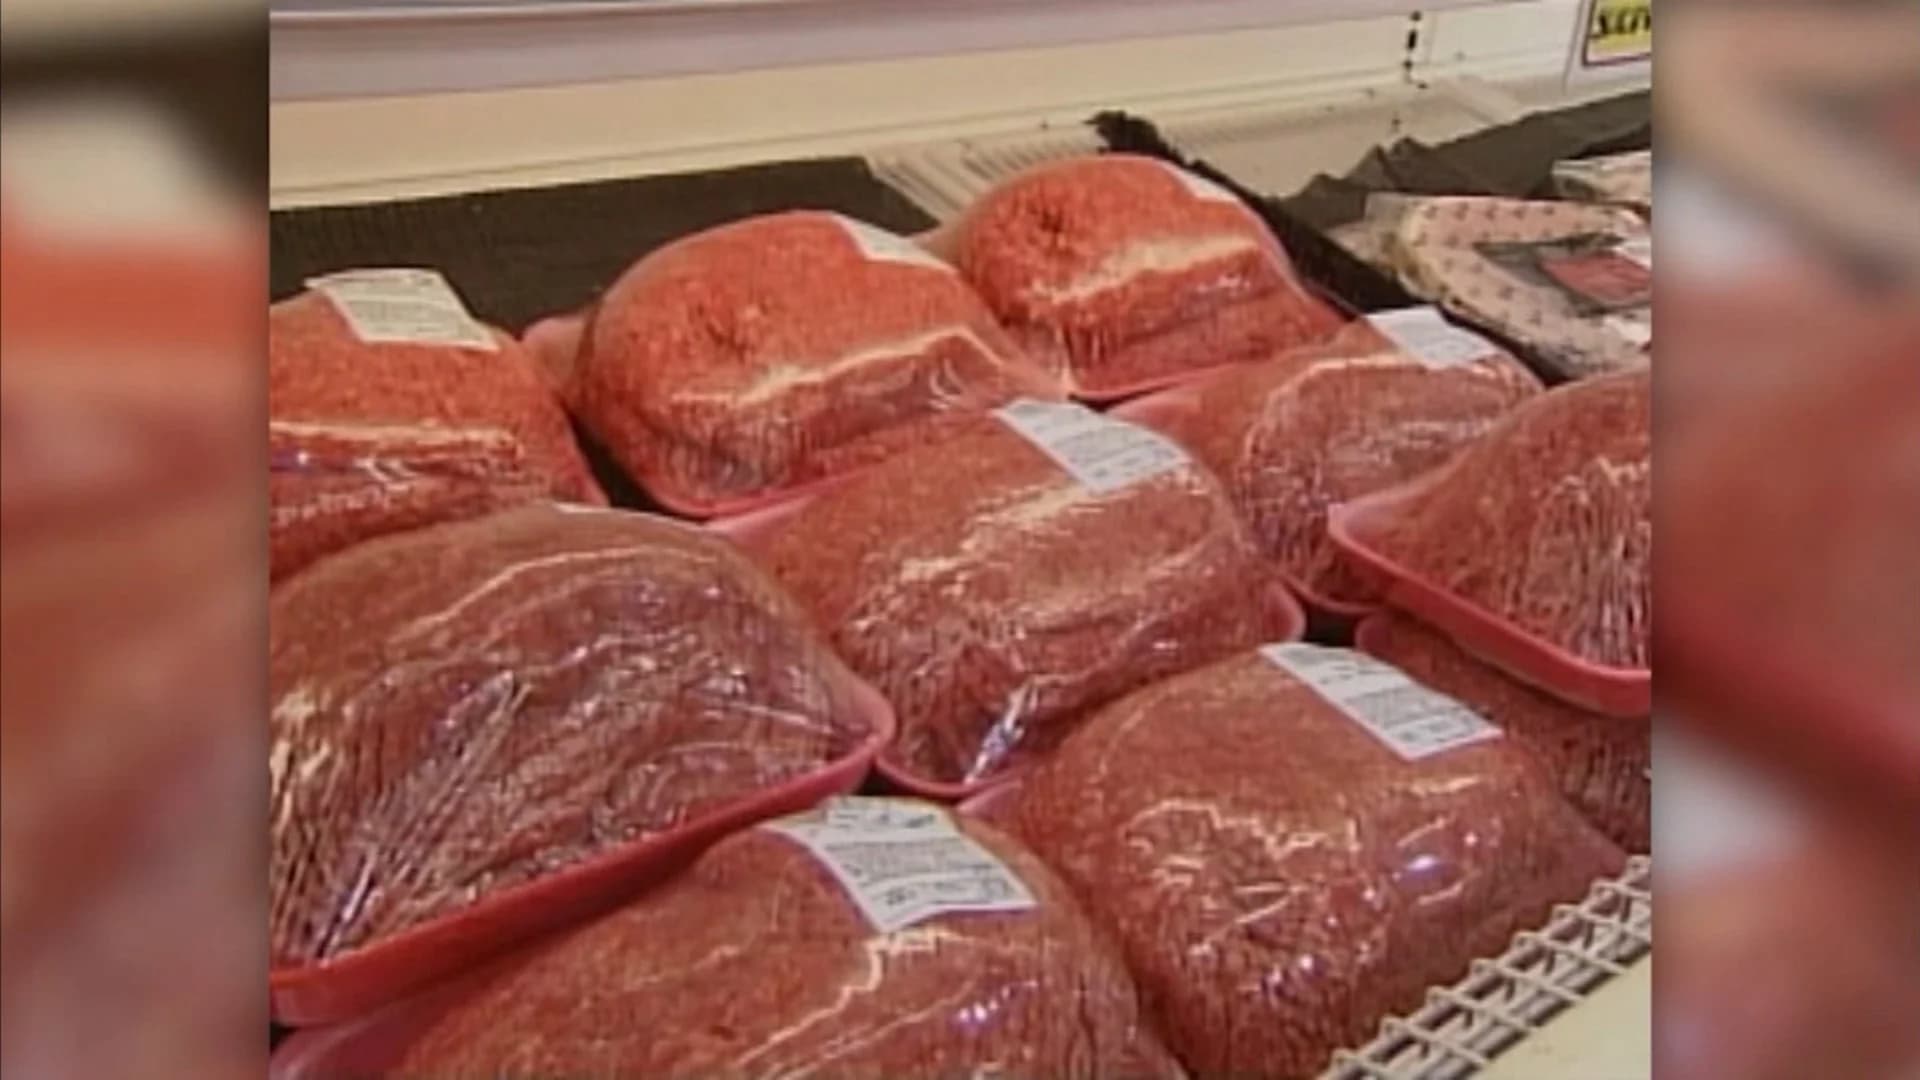 17 hospitalized, over 100 affected after CDC traces E. coli outbreak to ground beef